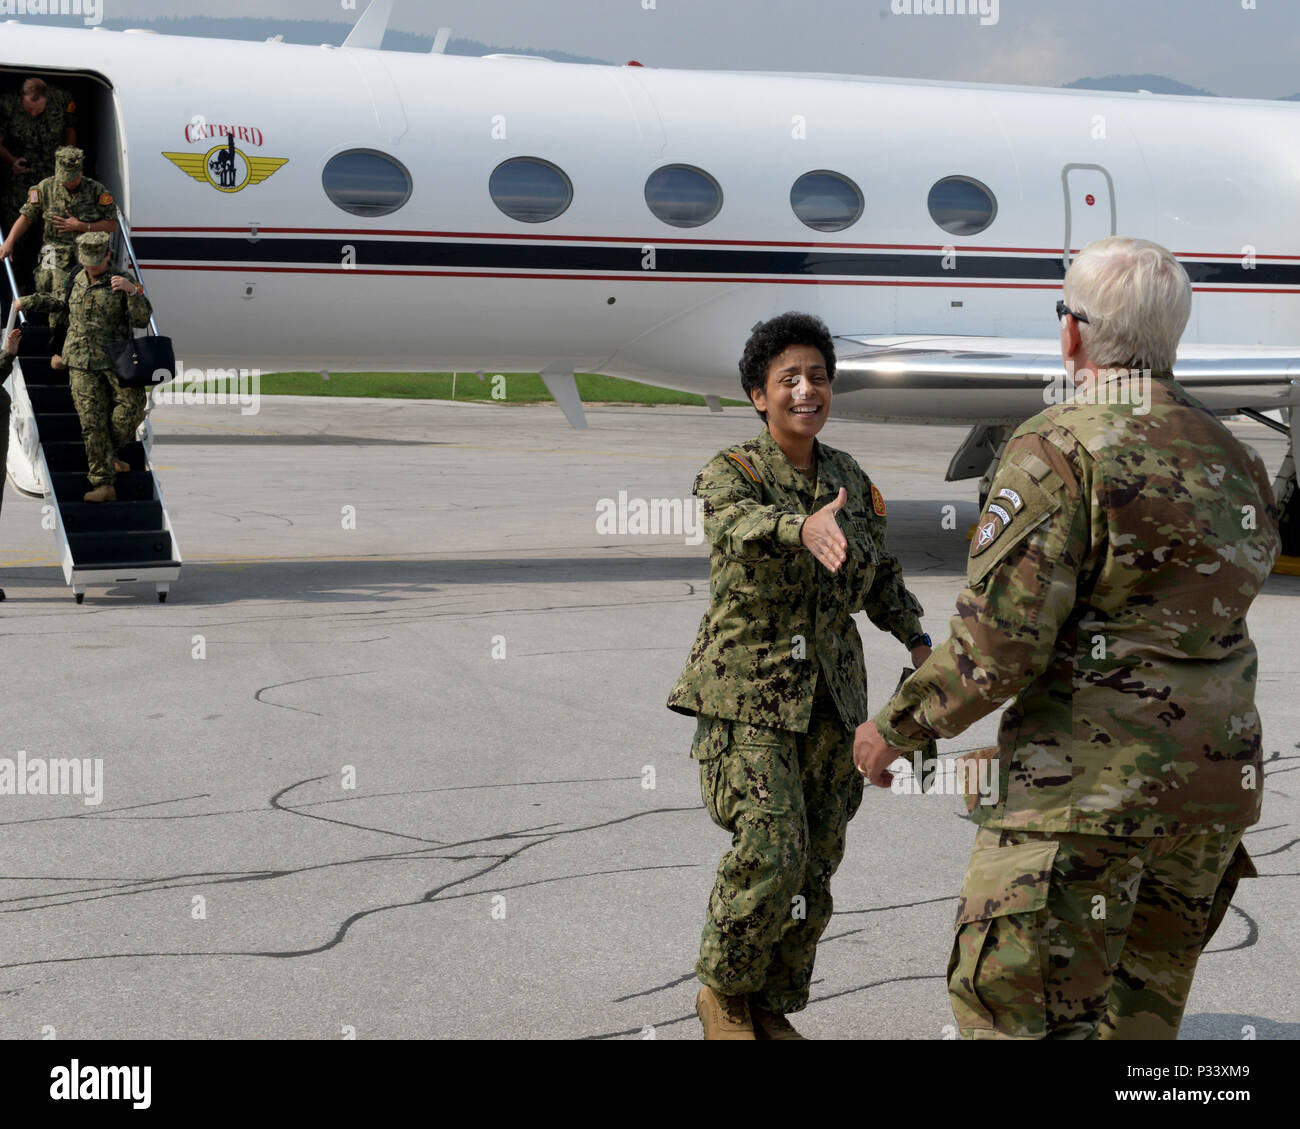 Brig. Gen. Giselle Wilz, NATO Headquarters Sarajevo commander, greets Adm. Michelle Howard, commander of Allied Joint Force Command, Naples, Italy, at the airport in Sarajevo, Bosnia and Herzegovina, Aug. 31, 2016. The admiral traveled to the capital city of BIH to discuss military and NATO operations in the Balkans area of responsibility. Stock Photo